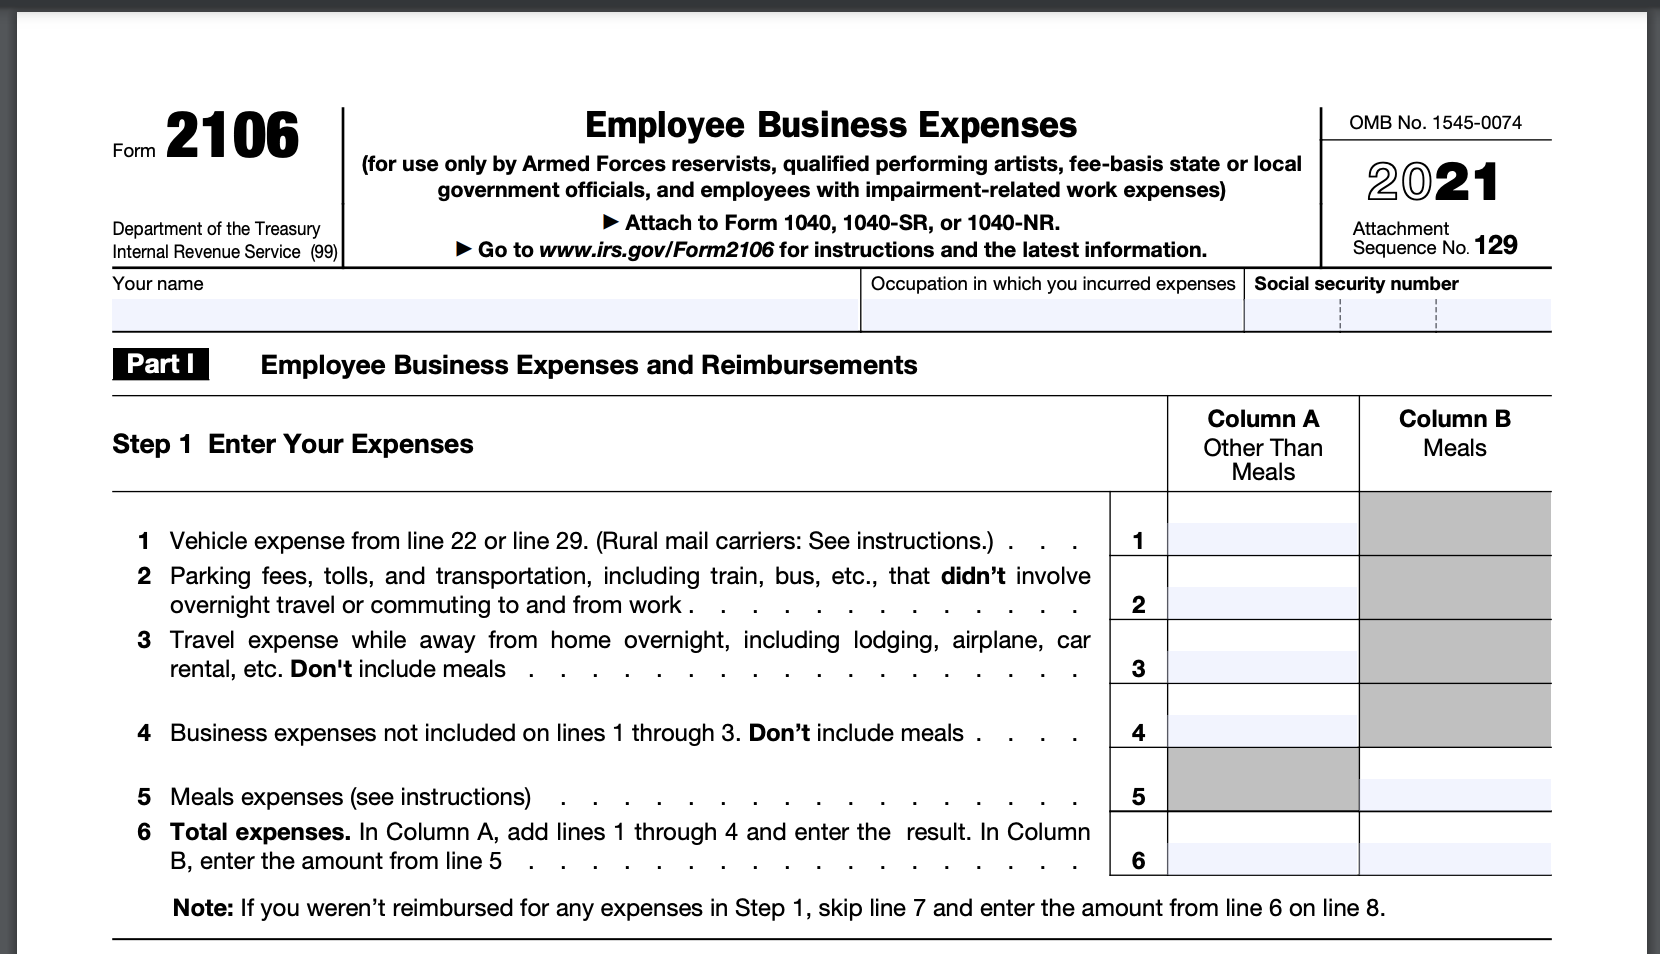 Employee business expense form 2106